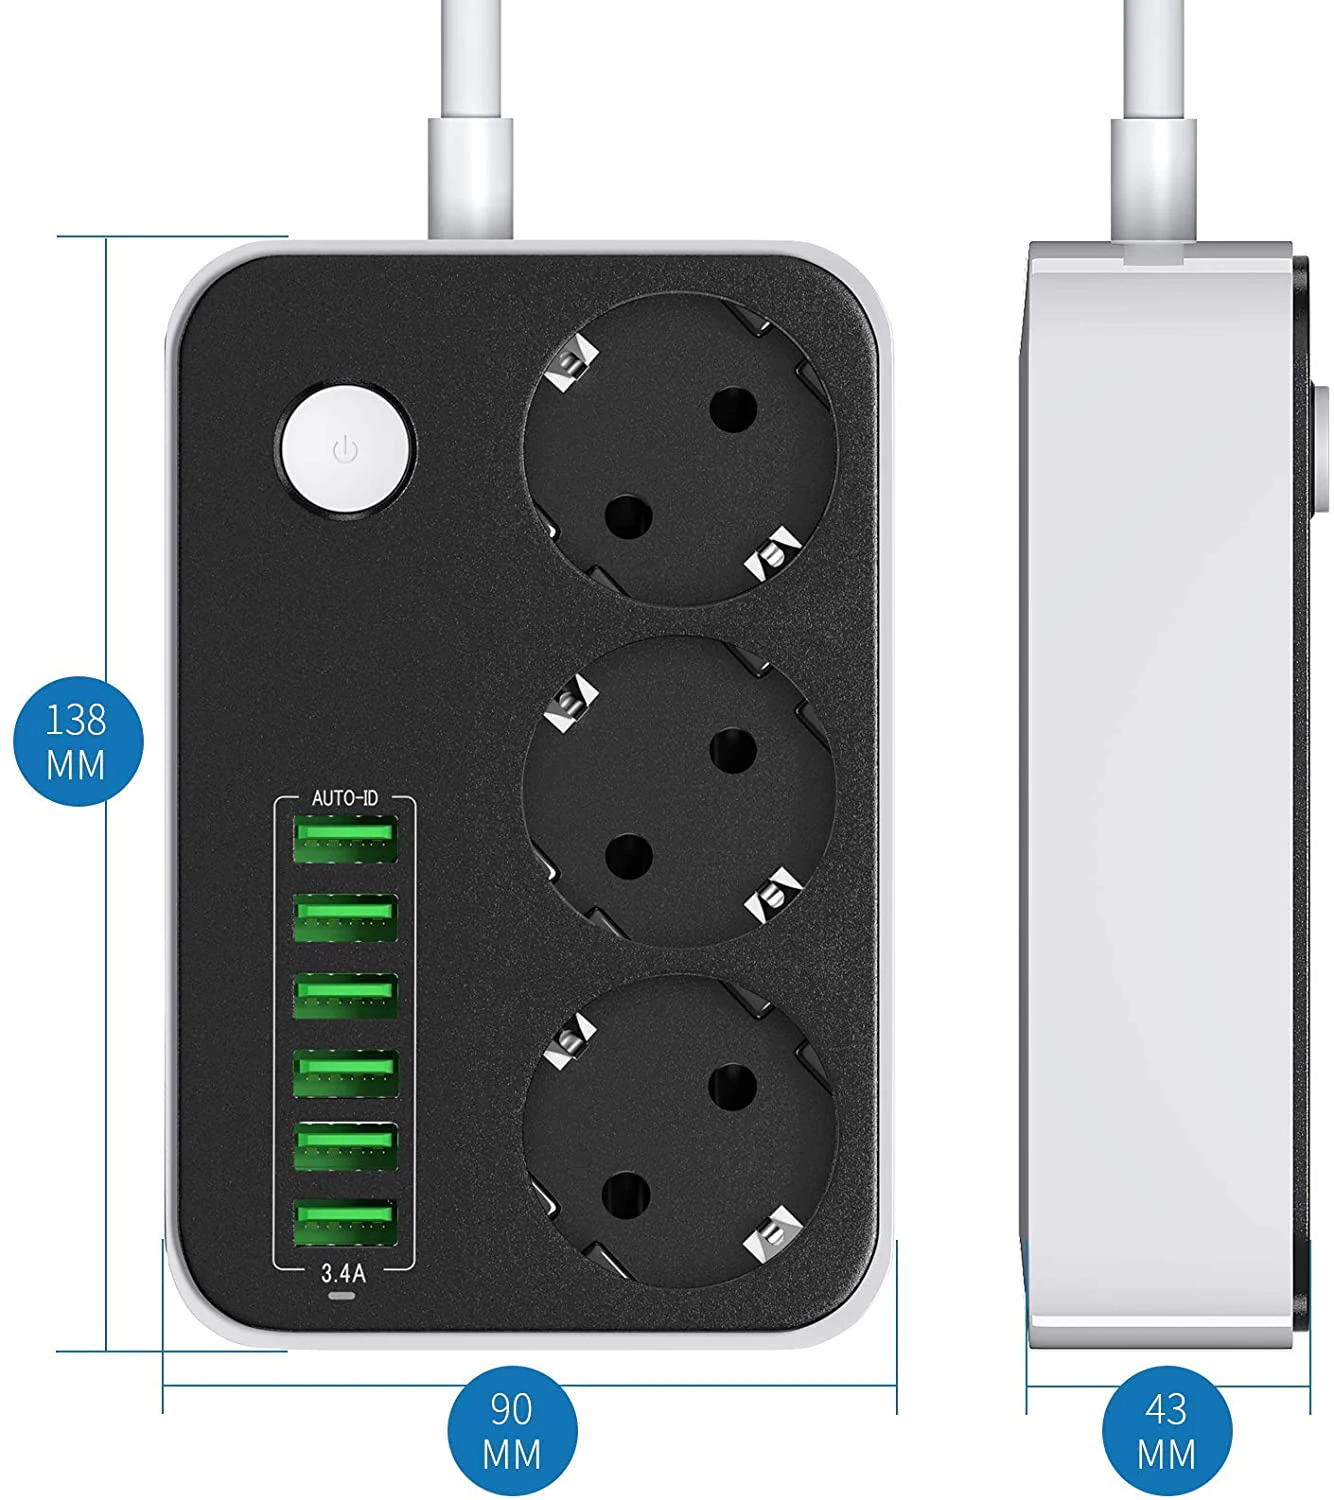 UK Power Strips with USB ports 3 Way Outlets 6 USB Ports Power Socket/Smart USB Charger Power UK Socket